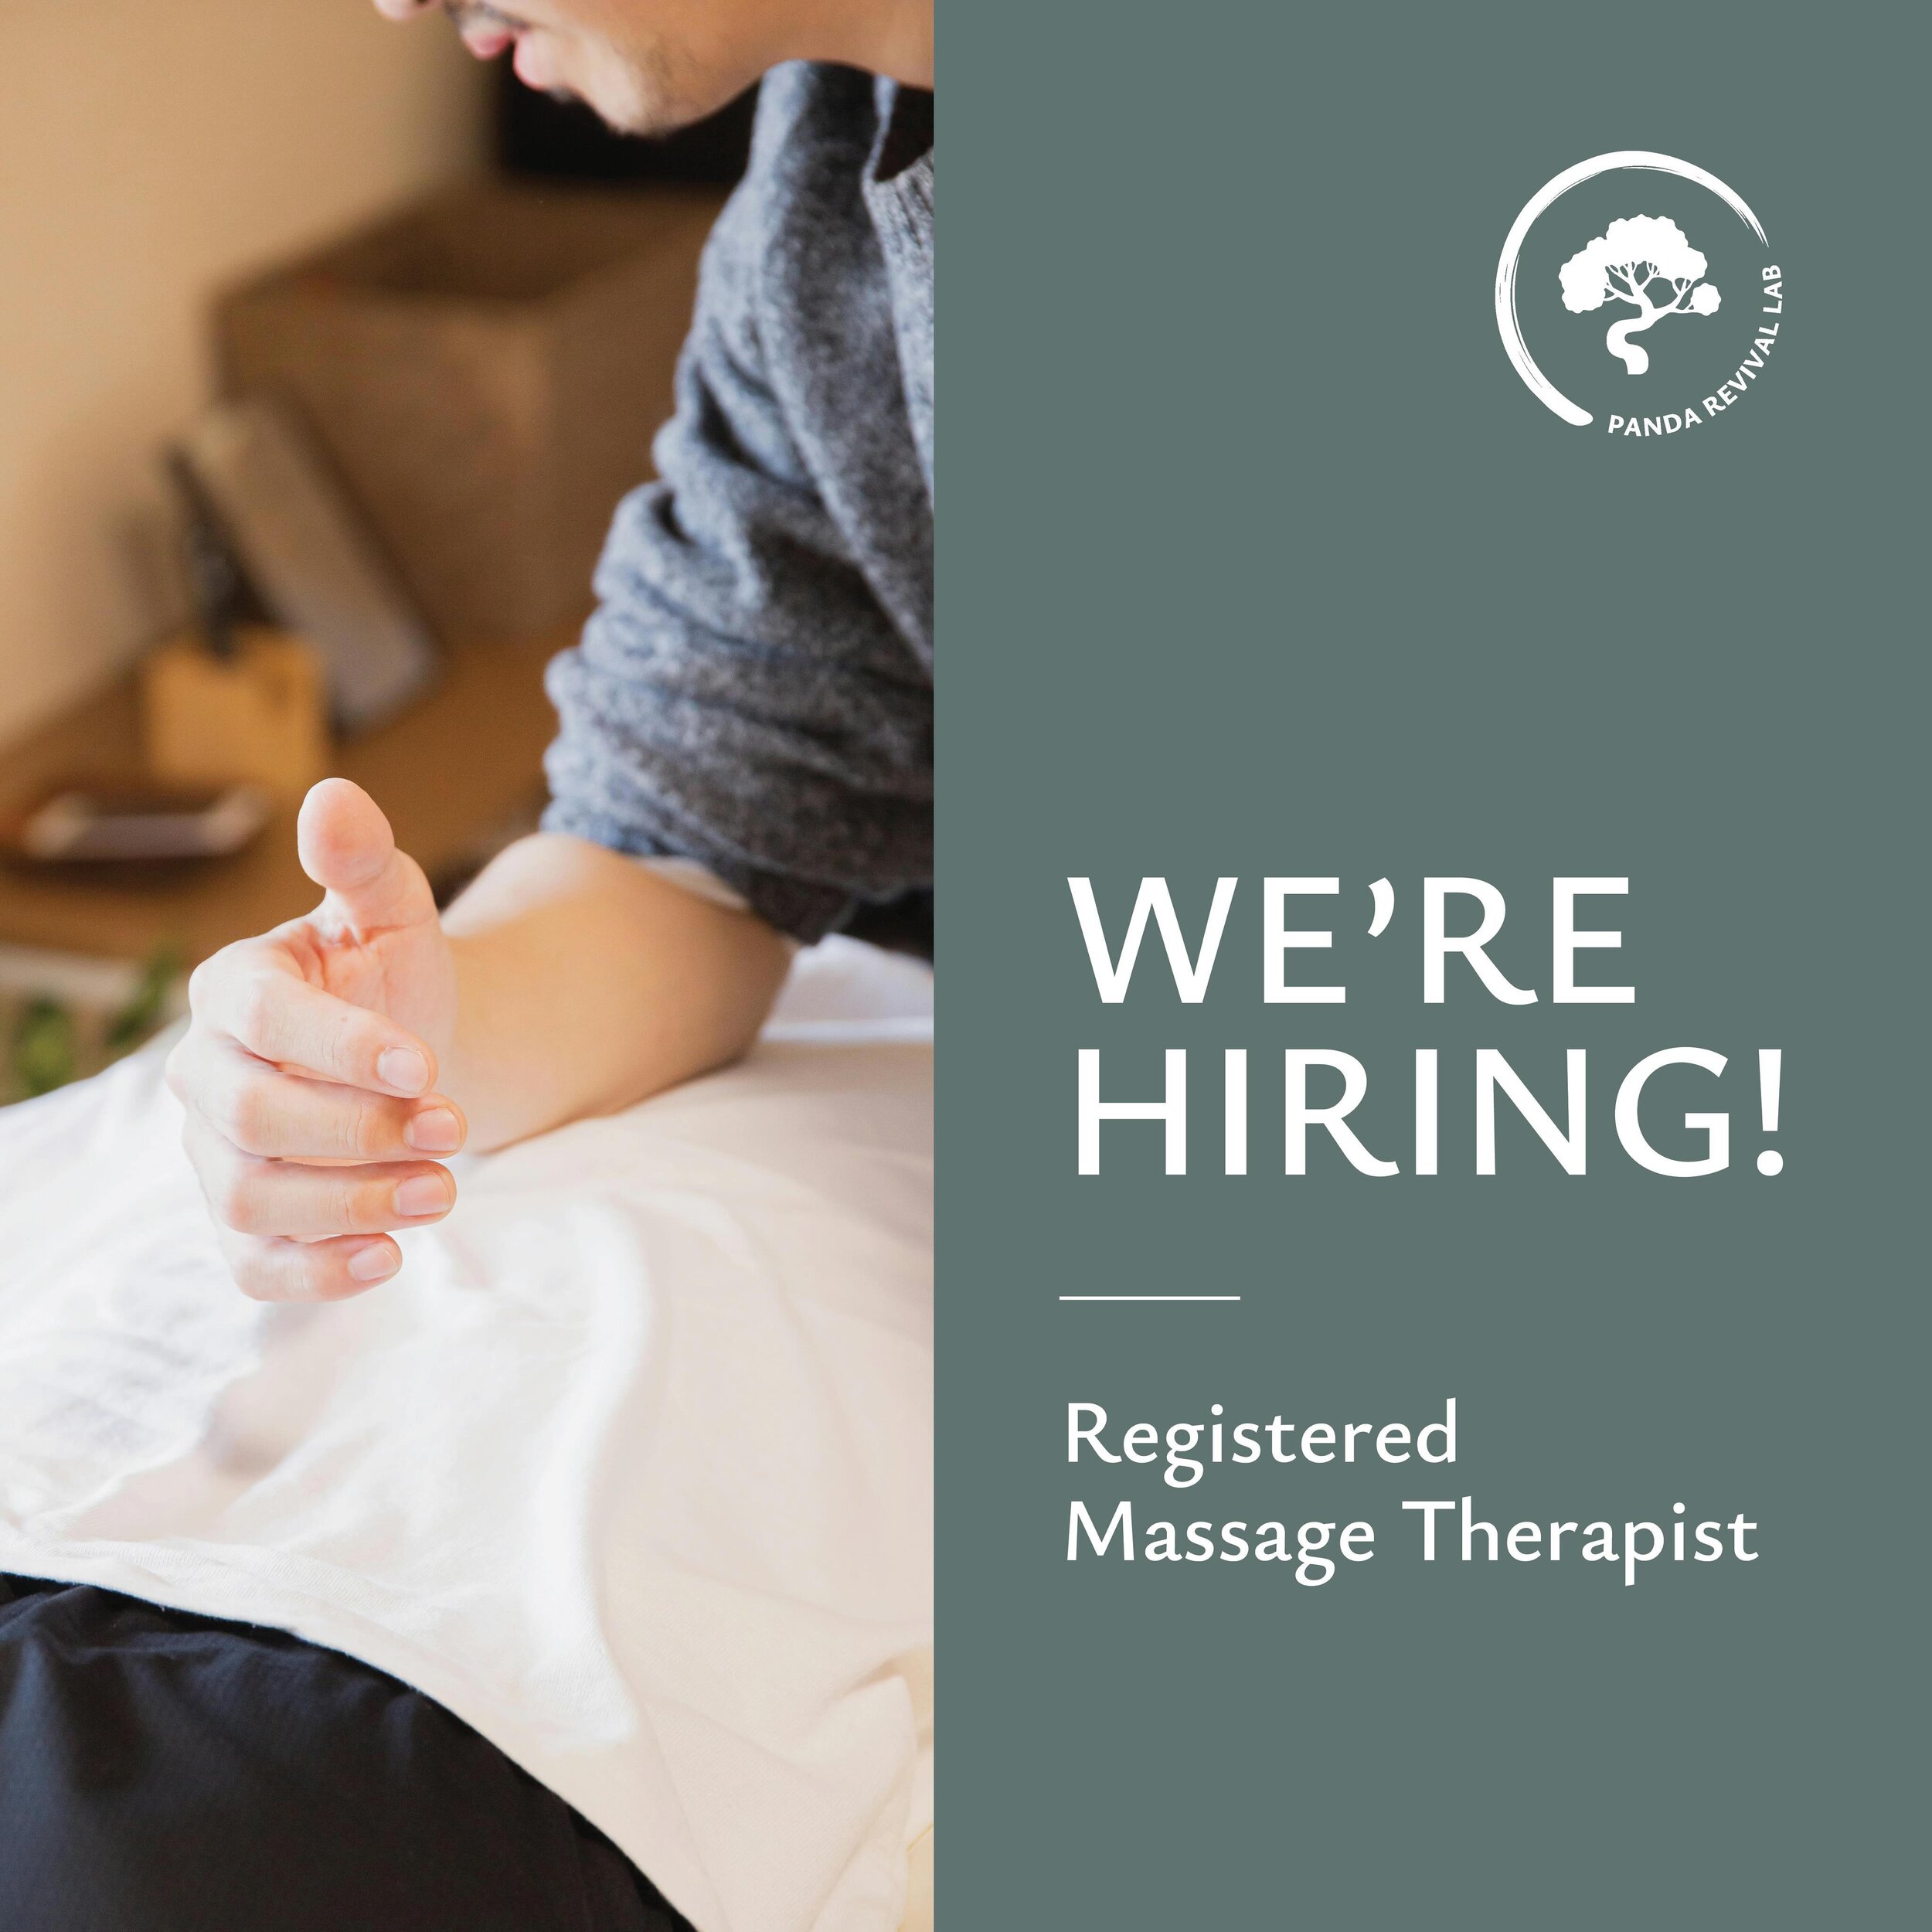 🌟 WE&rsquo;RE HIRING! 🌟
REGISTERED MASSAGE THERAPIST WANTED 👐

Join our team at Panda Revival! With a growing client base and state-of-the-art facilities, we are looking for dedicated individuals to fill full and part-time positions.

🔹 Work in o